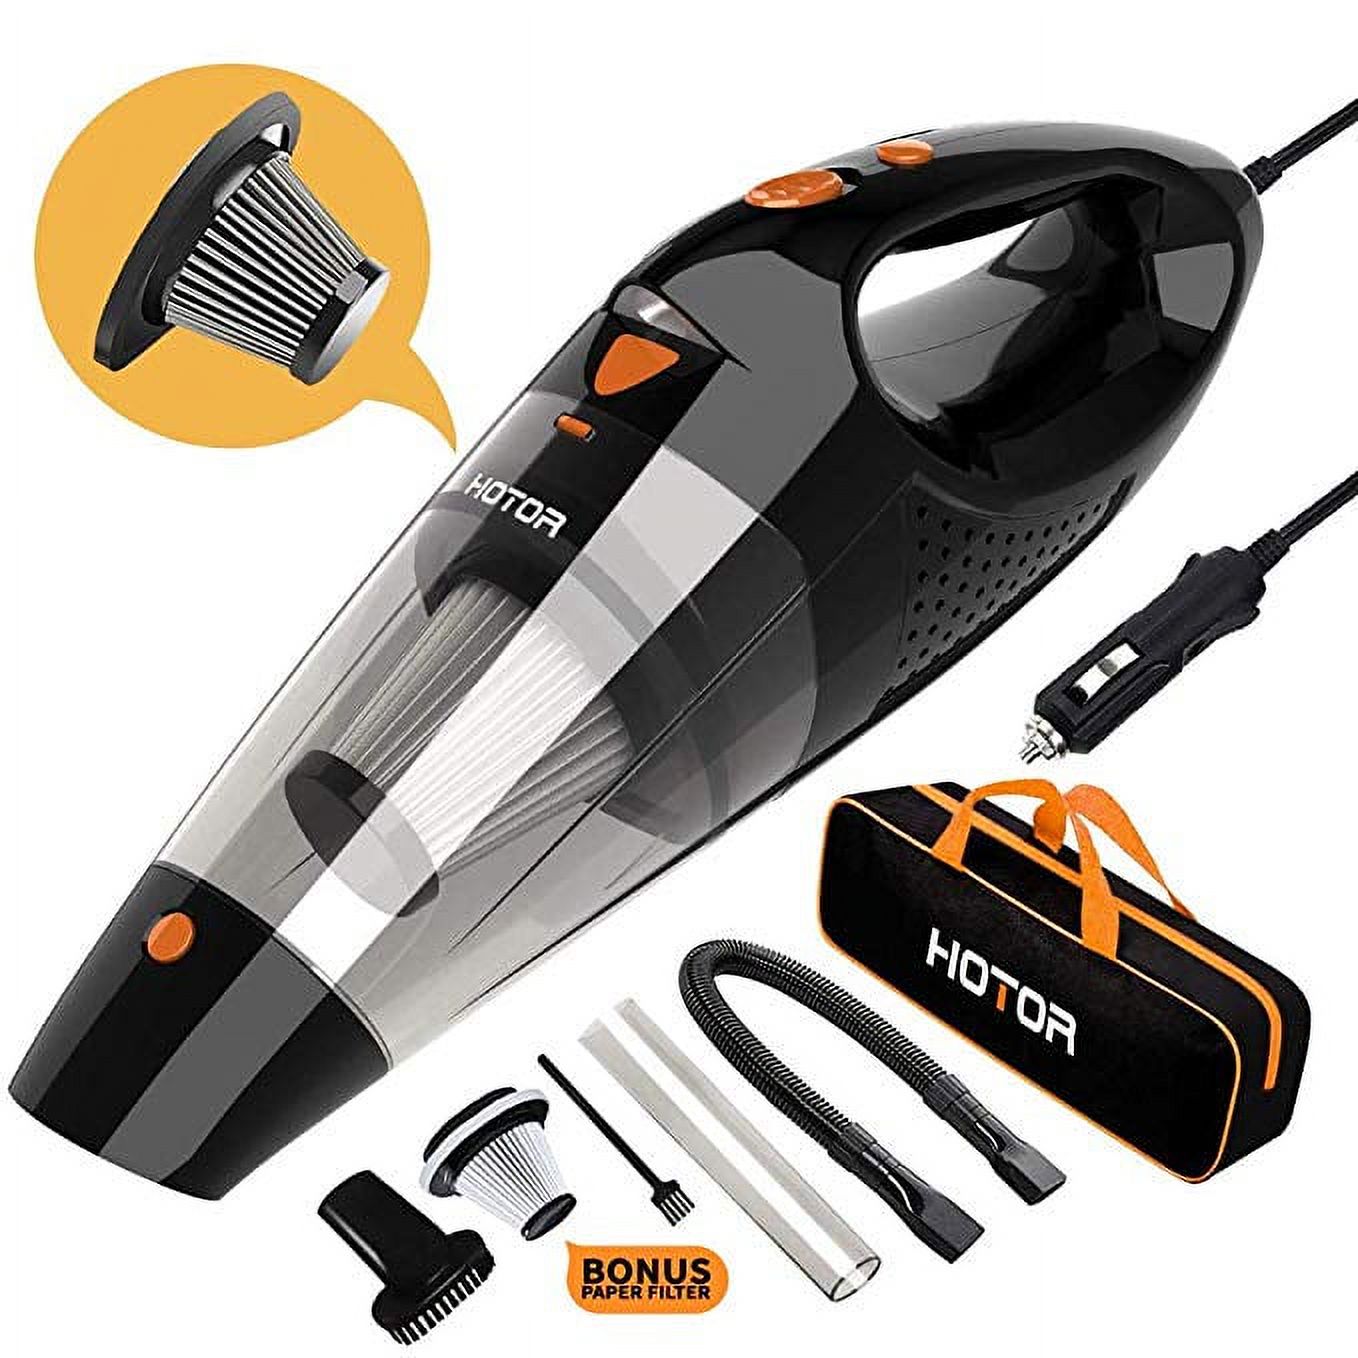 Car Vacuum, HOTOR Corded Car Vacuum Cleaner High Power for Quick Car Cleaning, DC 12V Portable Auto Vacuum Cleaner for Car Use Only - Orange - image 1 of 8